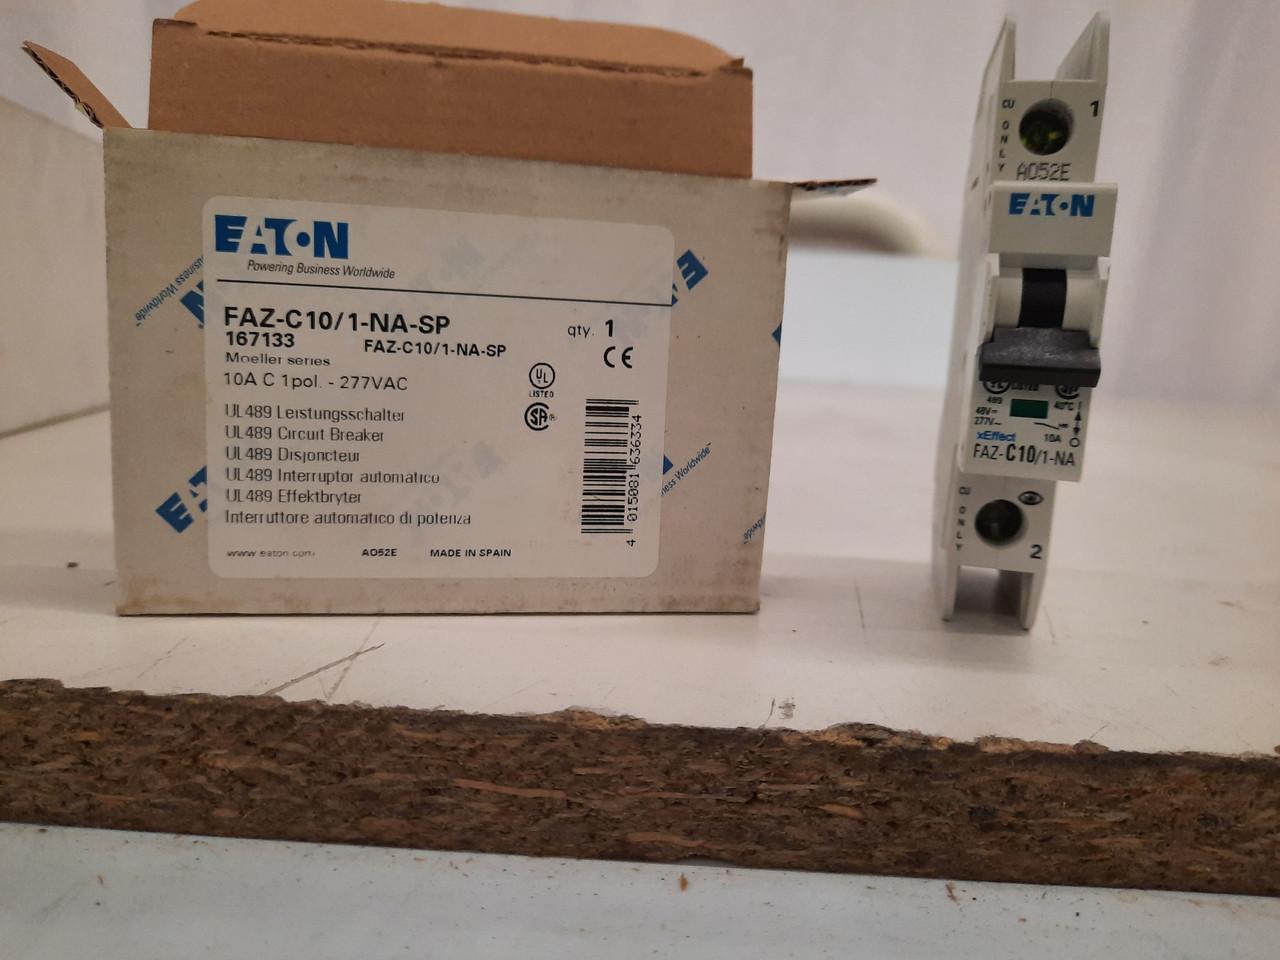 Eaton FAZ-C10/1-NA-SP Eaton FAZ branch protector,UL 489 Industrial miniature circuit breaker - supplementary protector,Single package,Medium levels of inrush current are expected,10 A,10 kAIC,Single-pole,277 V,5-10X /n,Q38,50-60 Hz,Screw terminals,C Curve